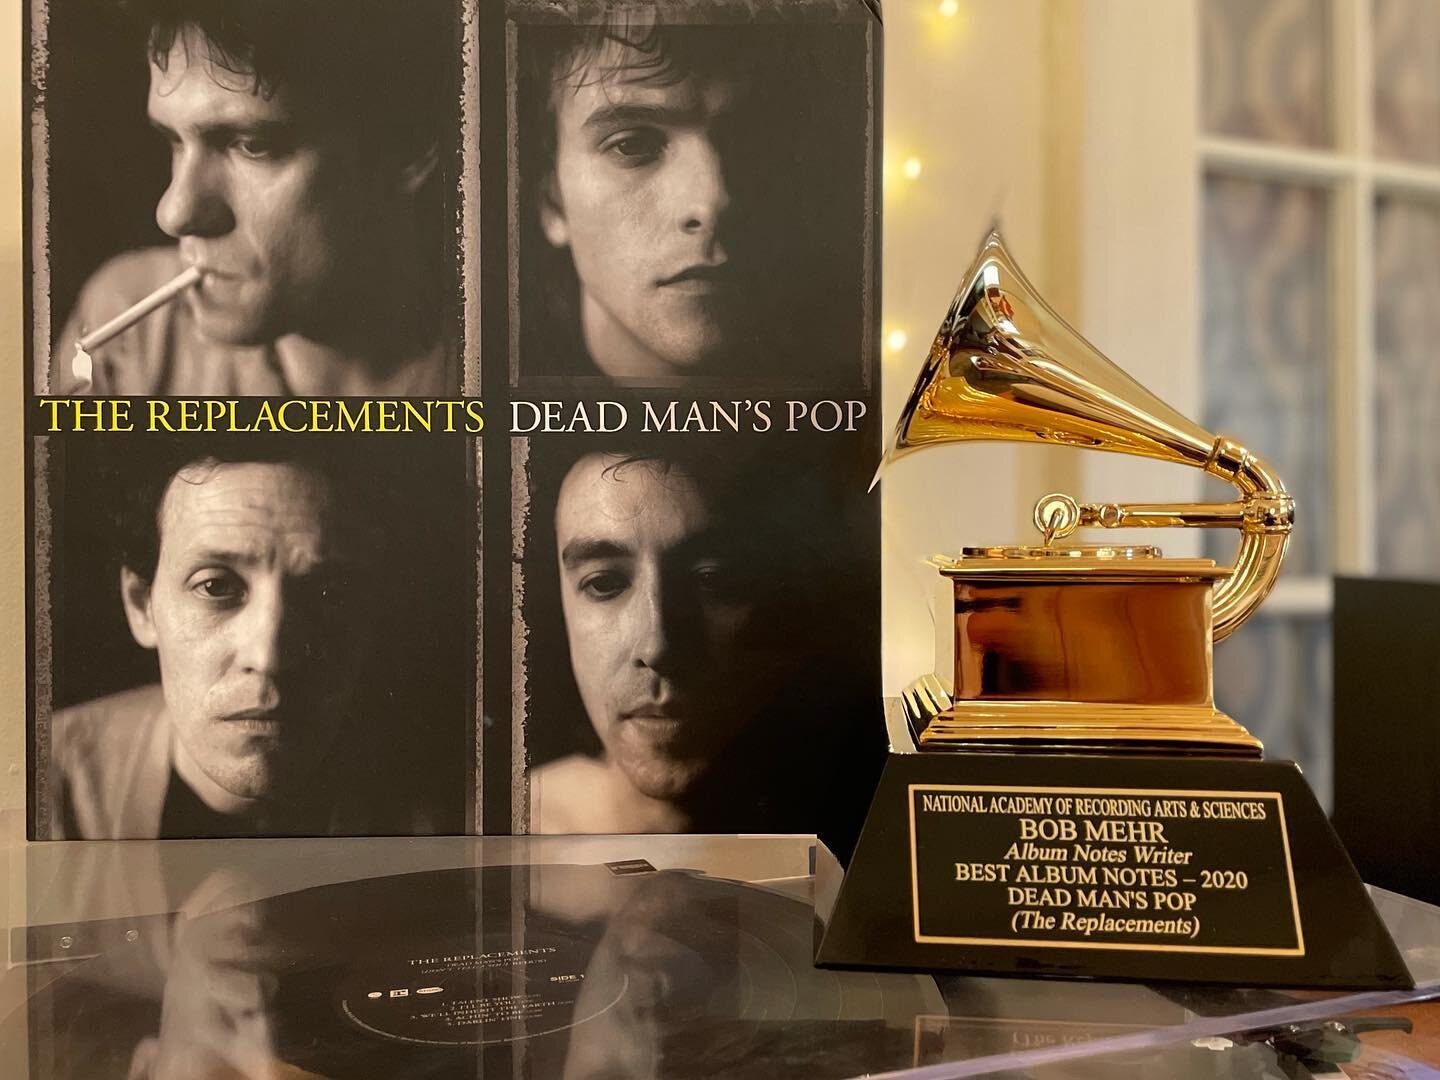 Well, the mail came today. In the words of Jack Benny: I don't deserve this award, but I have arthritis and I don't deserve that either. Much as I'm proud of this lovely honor, I'm even more proud of 'Dead Man's Pop' itself, and the fact that we were